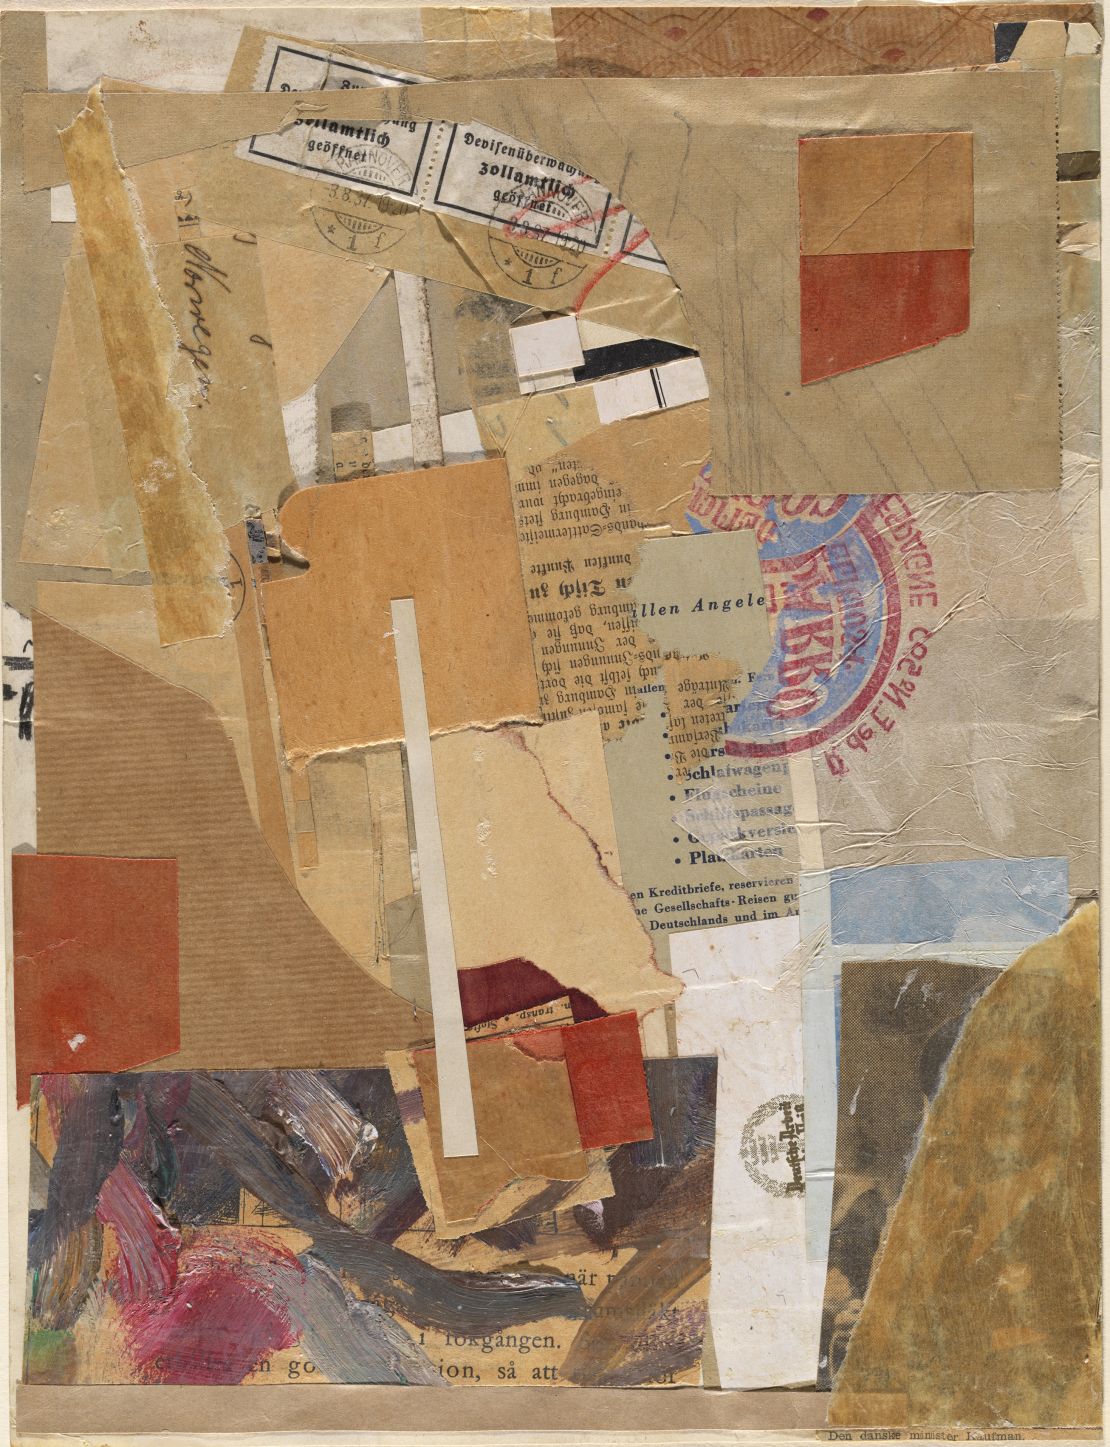 Kurt Schwitters' "Opened by Customs," made in 1937-38.